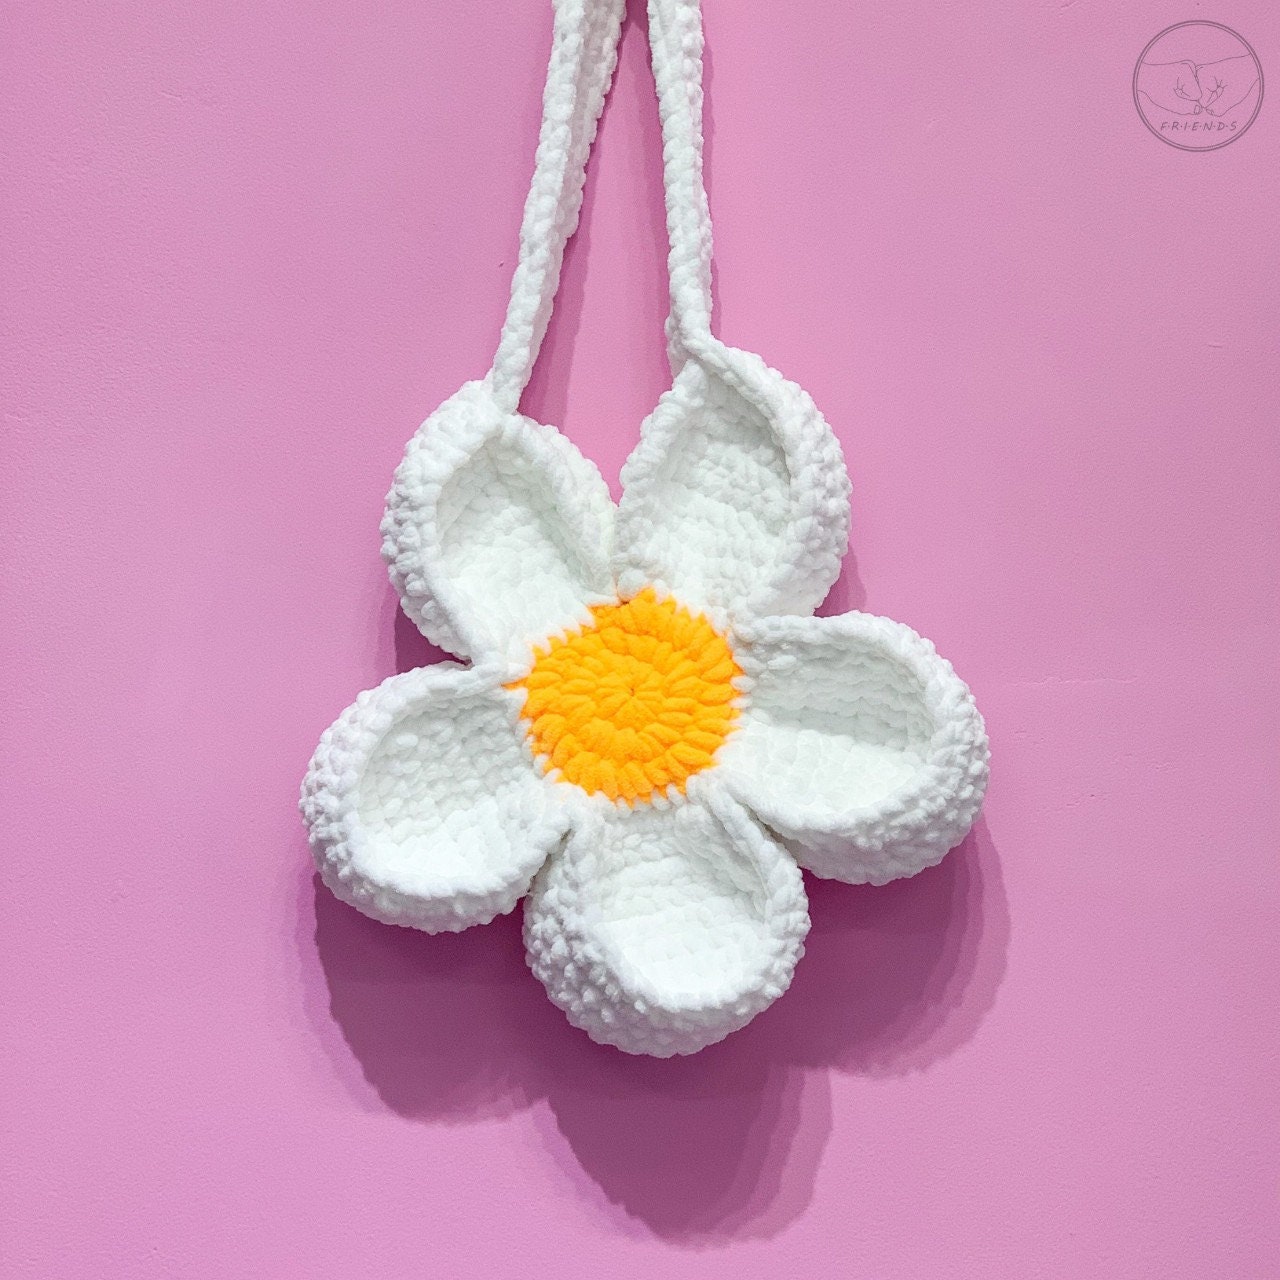 Online Let's Crochet a Quick Daisy Finger Ring Course · Creative